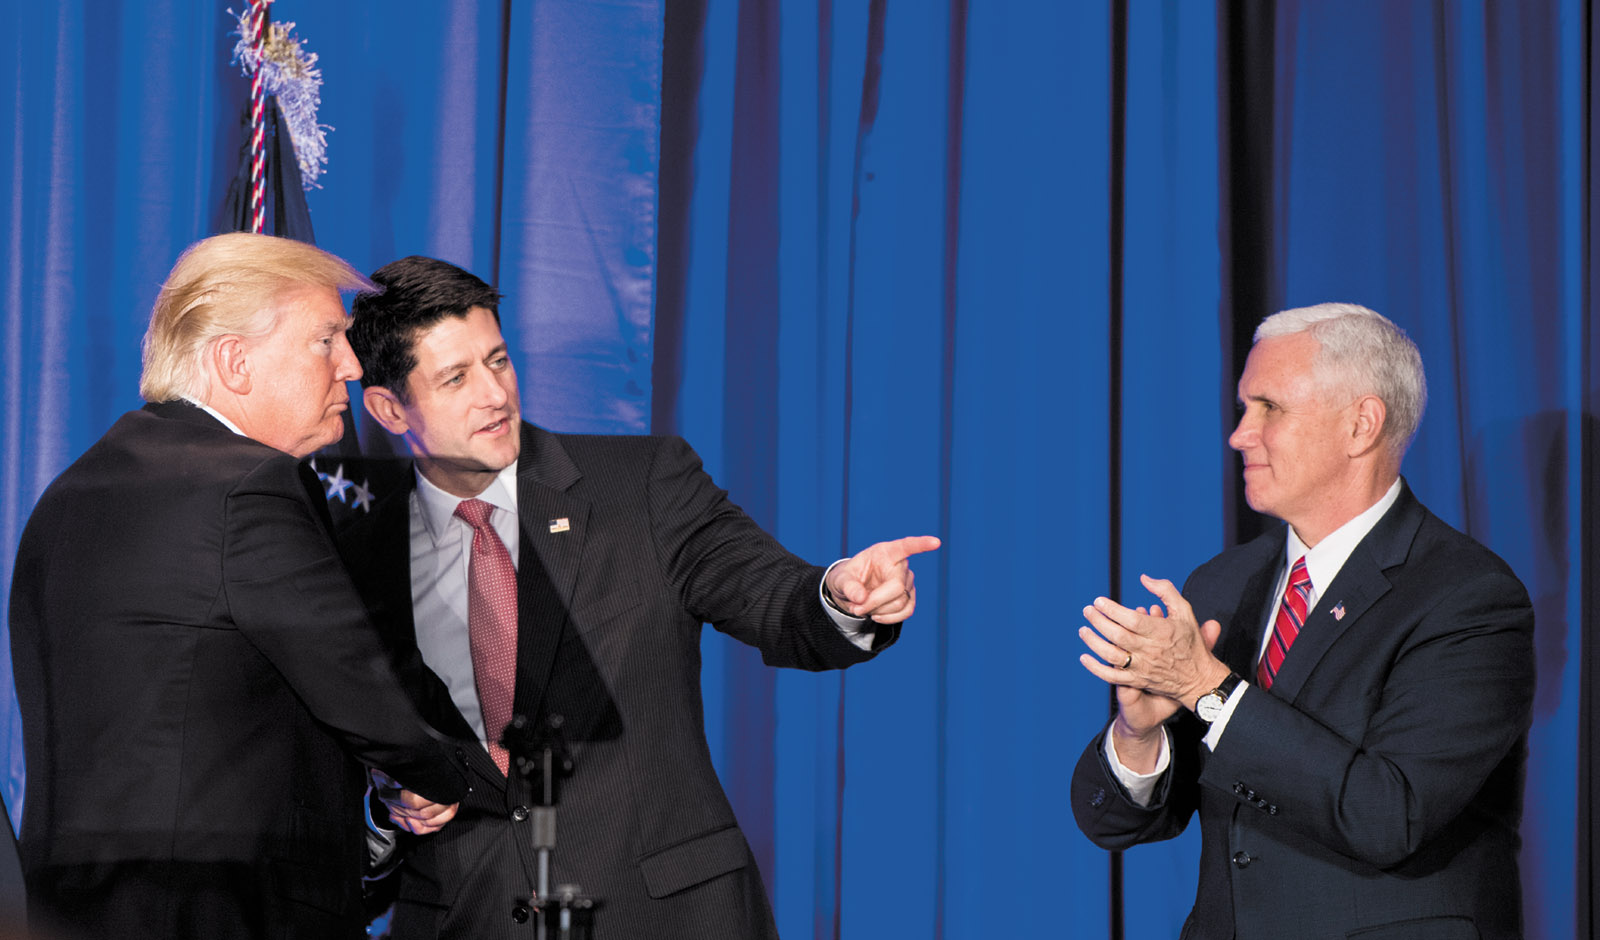 President Donald Trump, House Speaker Paul Ryan, and Vice President Mike Pence at the GOP congressional retreat, Philadelphia, January 2017